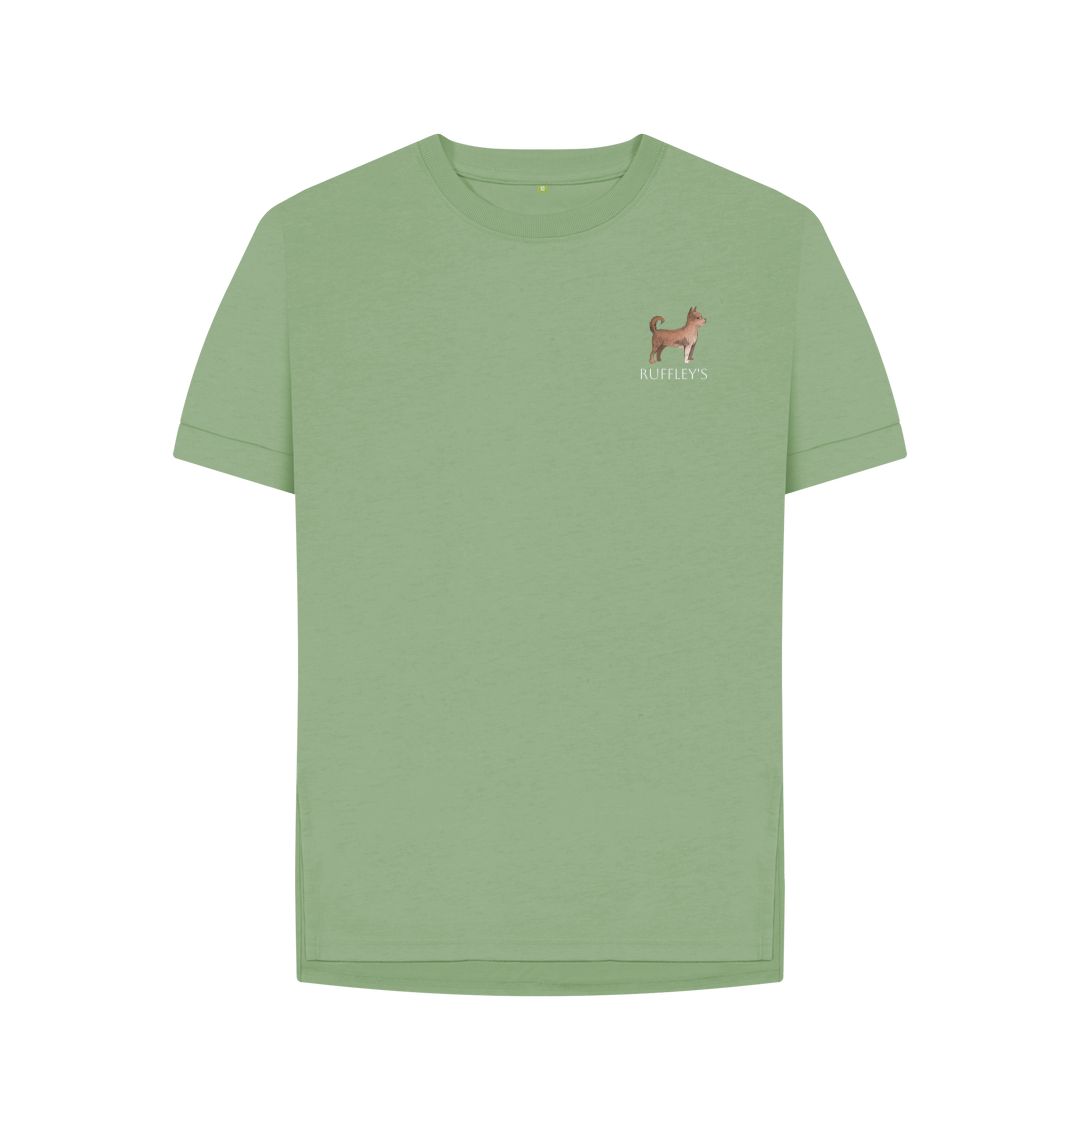 Sage Chihuahua - Relaxed Fit T-Shirt